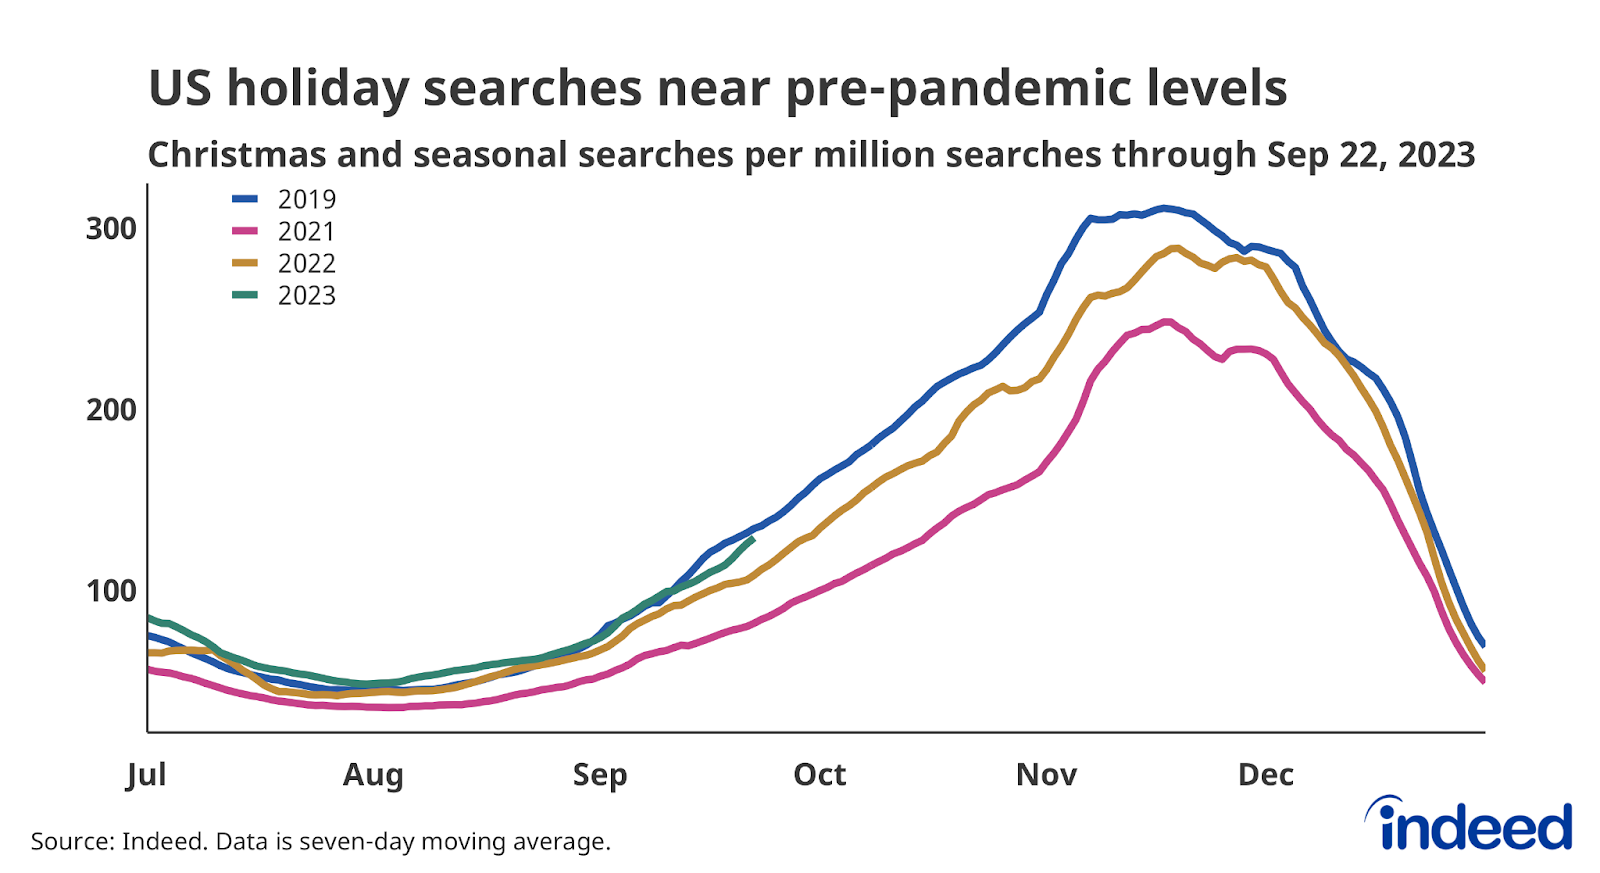 Line chart titled “US holiday searches near pre-pandemic levels.” With a vertical axis ranging from 0 to 300, Indeed tracked holiday-related searches per million along a horizontal axis running from July to January, with different colored lines representing 2019, 2021, 2022, and 2023. As of September 22, 2023, the share of job seeker searches for seasonal work is up 19% compared to the 2022 trend.